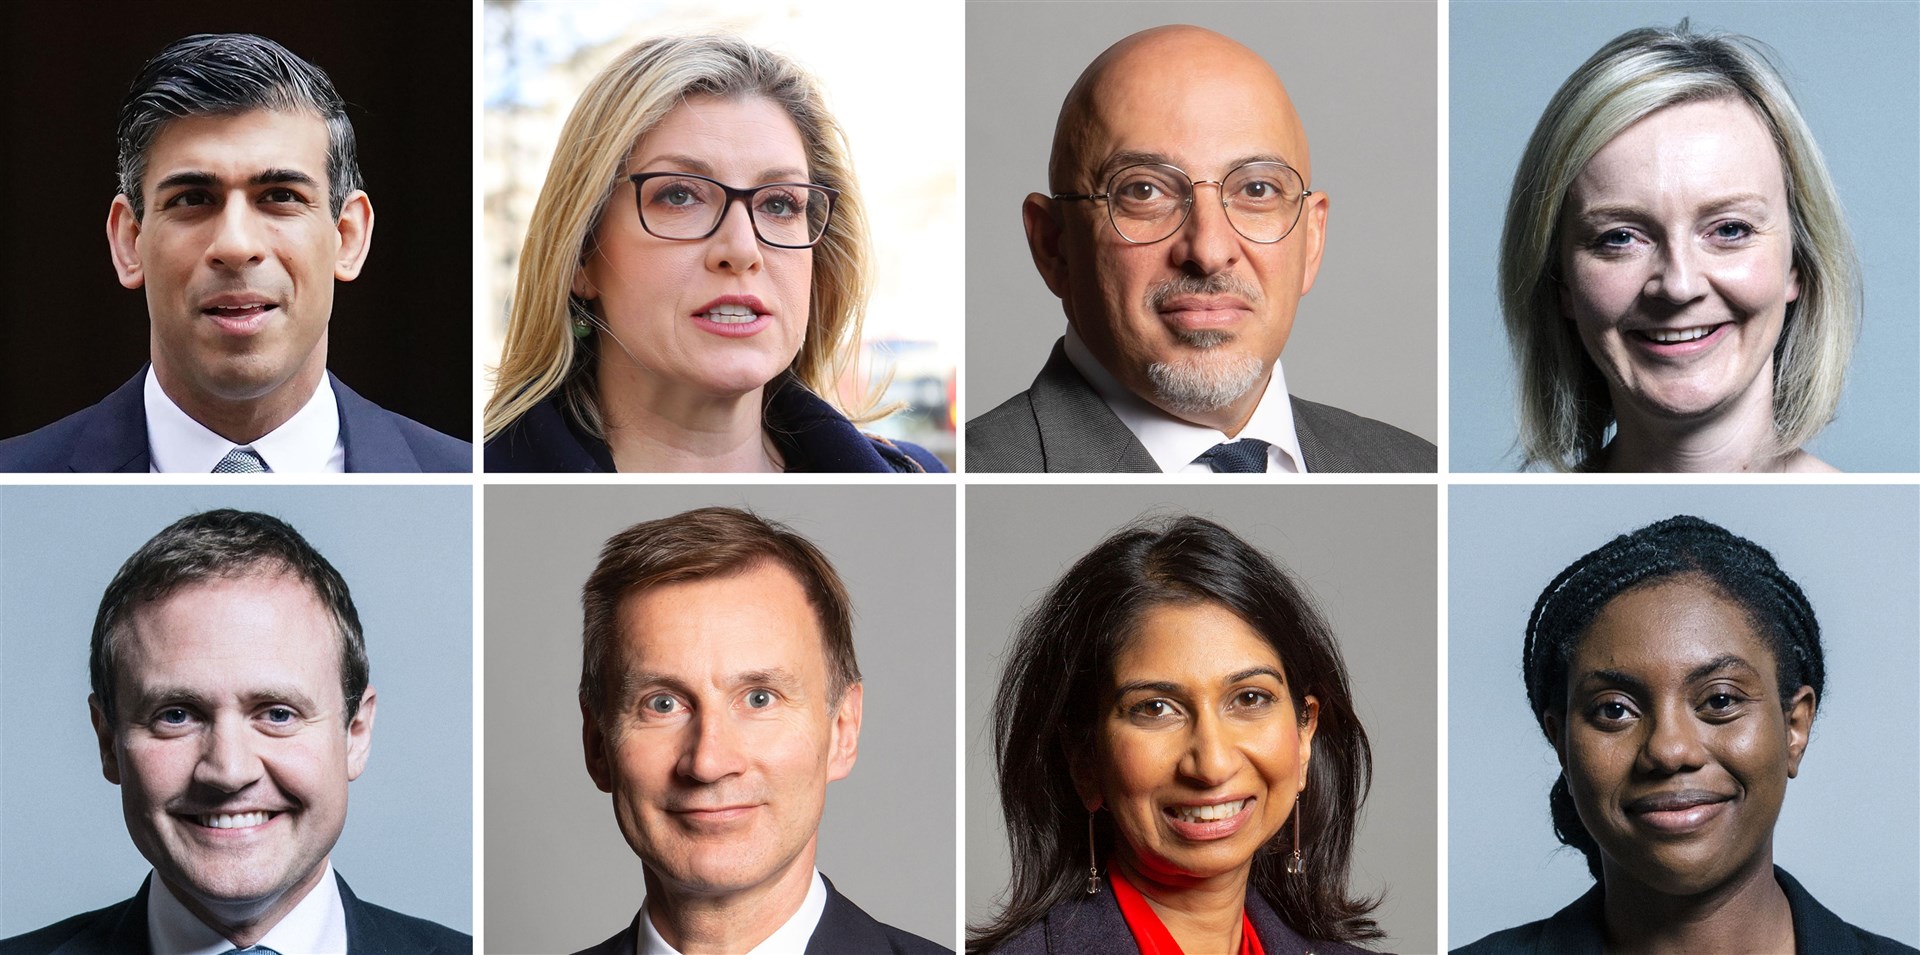 The eight candidates in the Conservative Party leadership race, (top row left to right), Rishi Sunak, Penny Mordaunt, Nadhim Zahawi, and Liz Truss, (bottom row left to right) Tom Tugendhat, Jeremy Hunt, Suella Braverman and Kemi Badenoch (UK Parliament/PA)